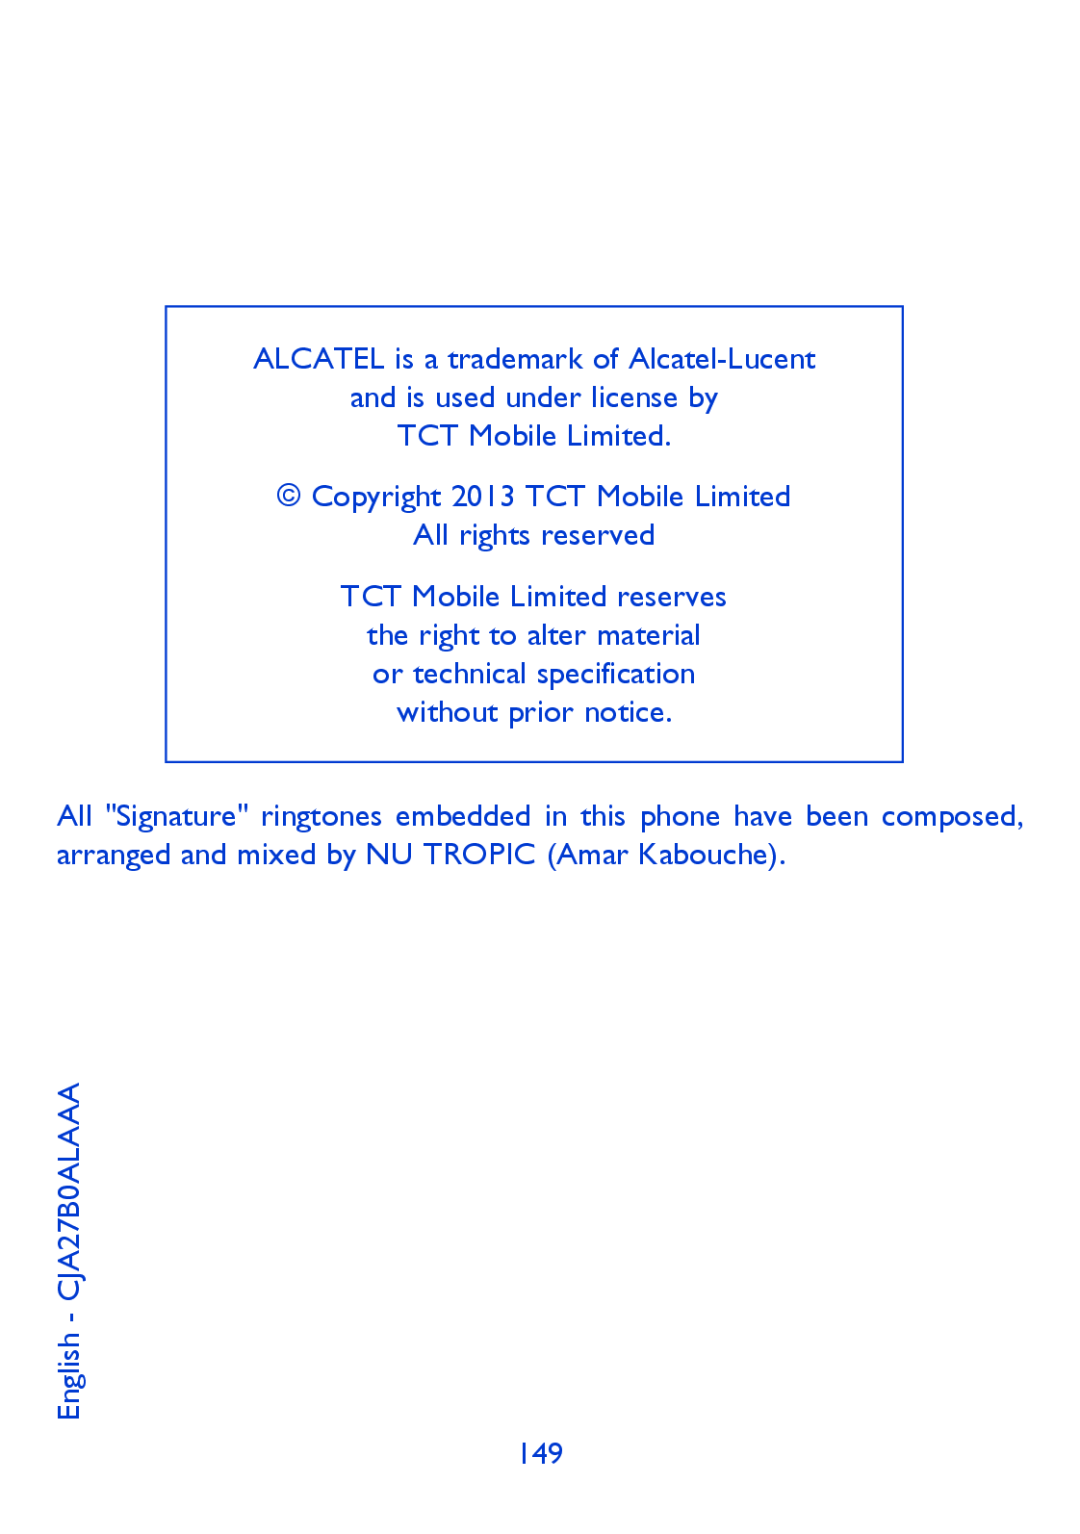 Alcatel 4033X manual ALCATEL is a trademark of Alcatel-Lucent and is used under license by, English - CJA27B0ALAAA 